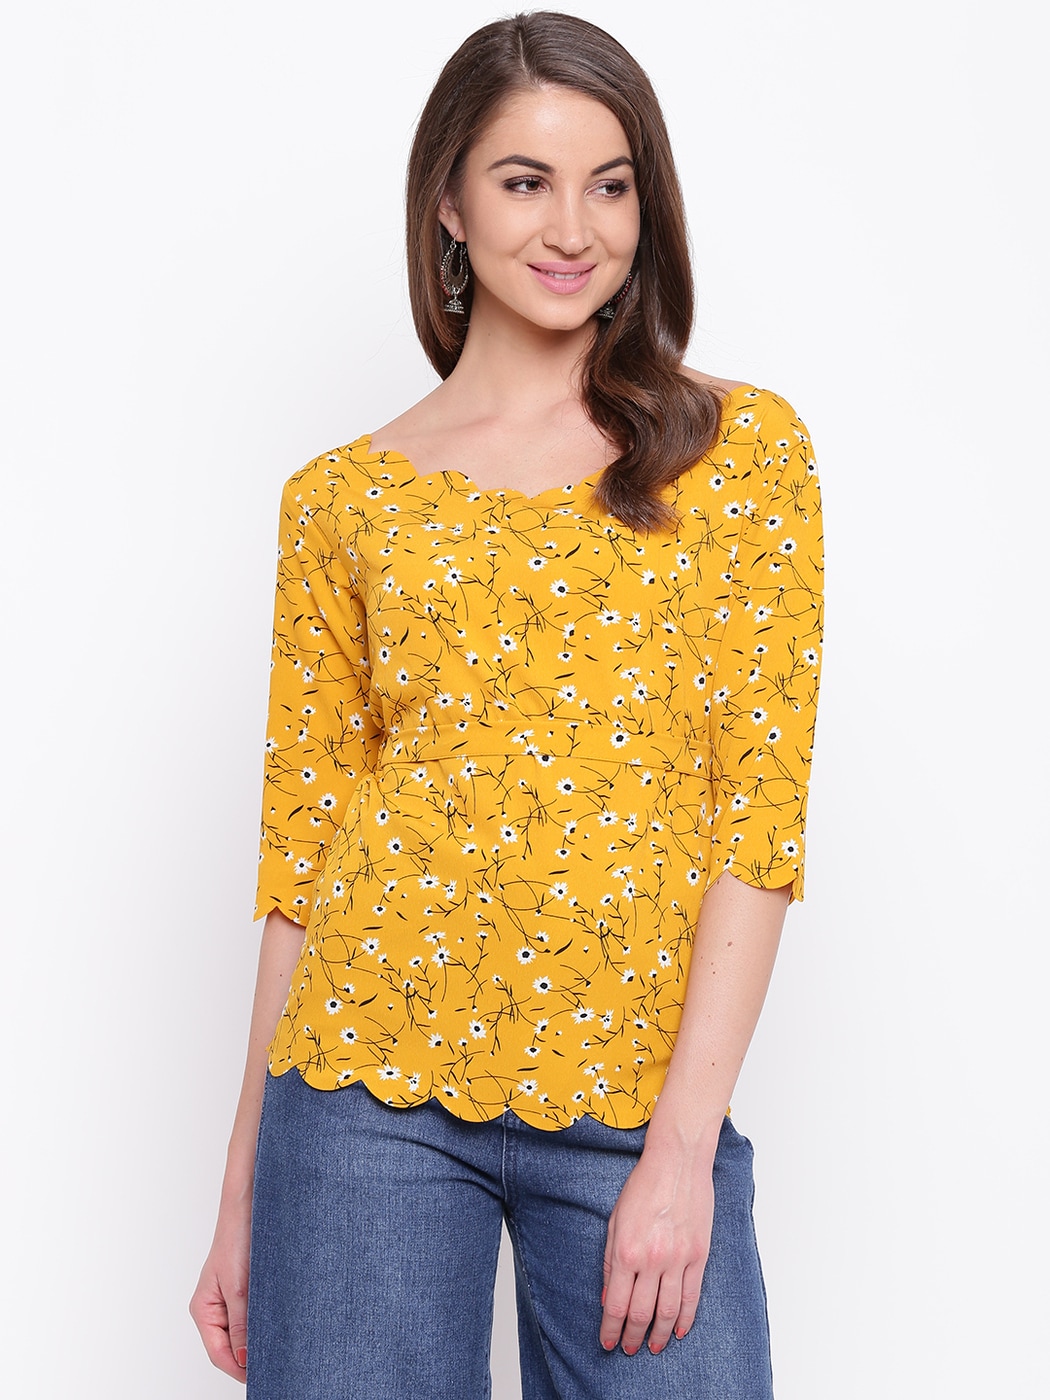 Discover 174+ yellow tops for jeans best